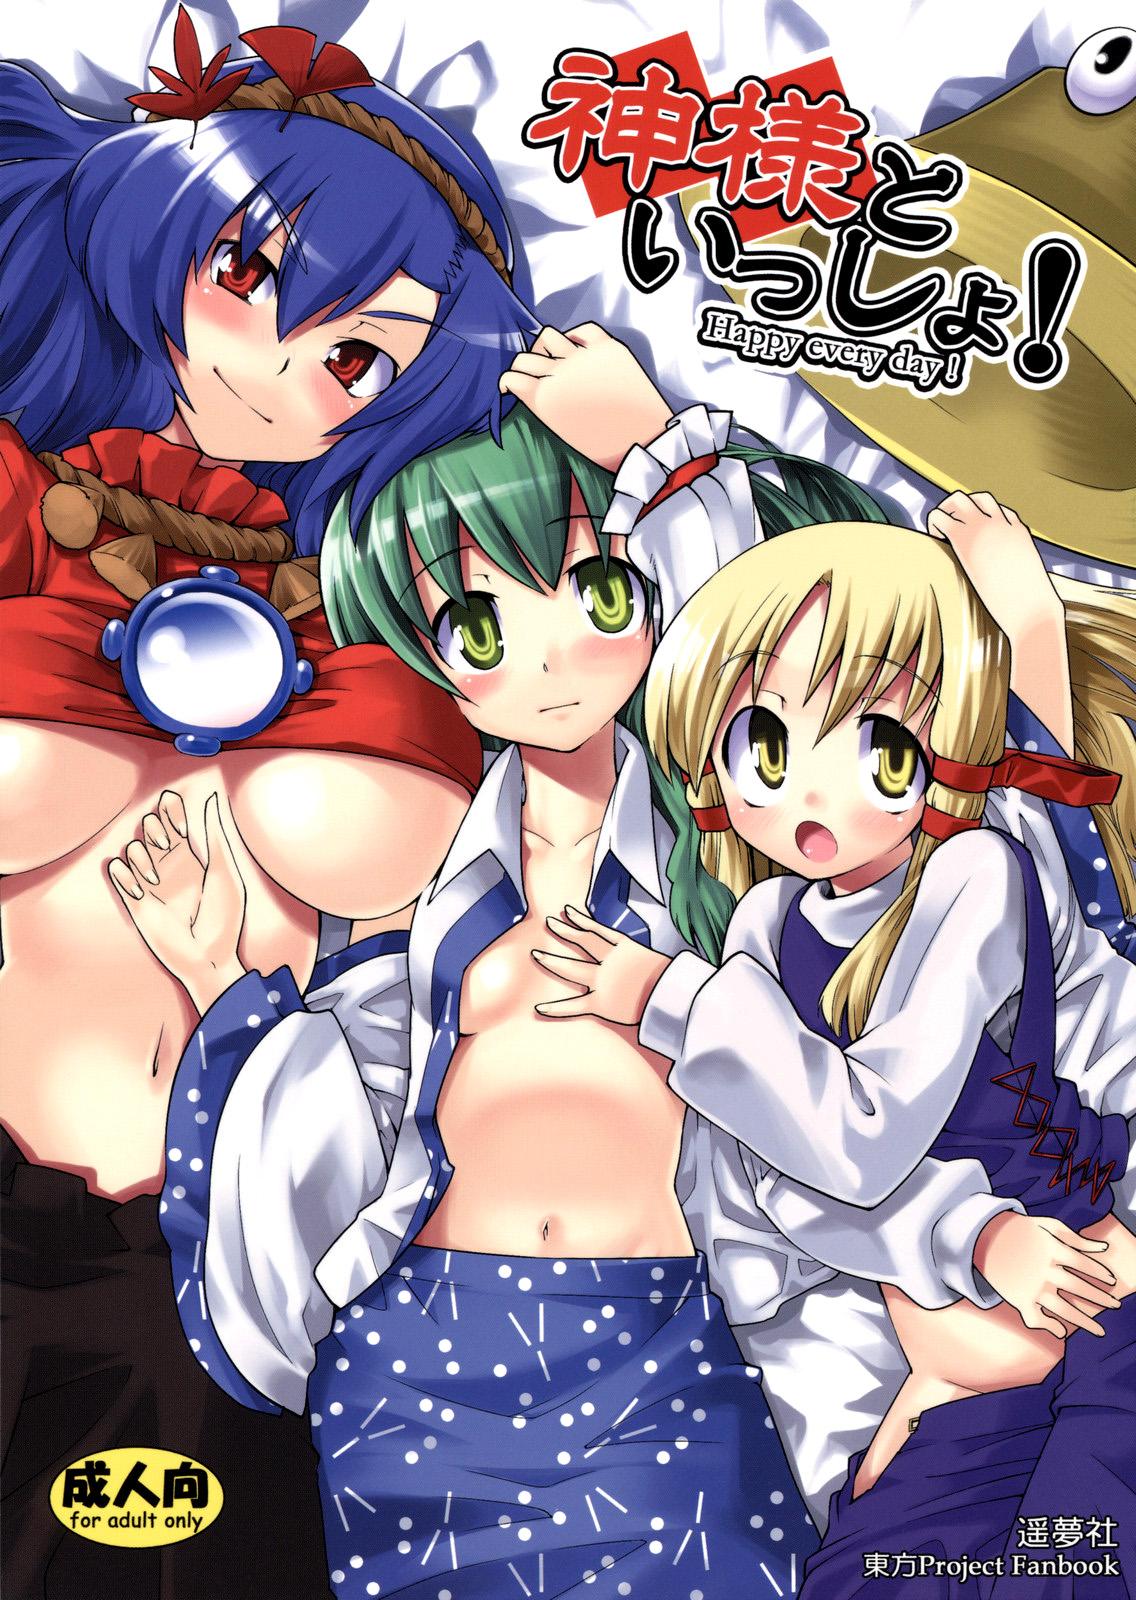 Tranny Porn Kami-sama to Issho! Happy every day! - Touhou project Cogiendo - Picture 1